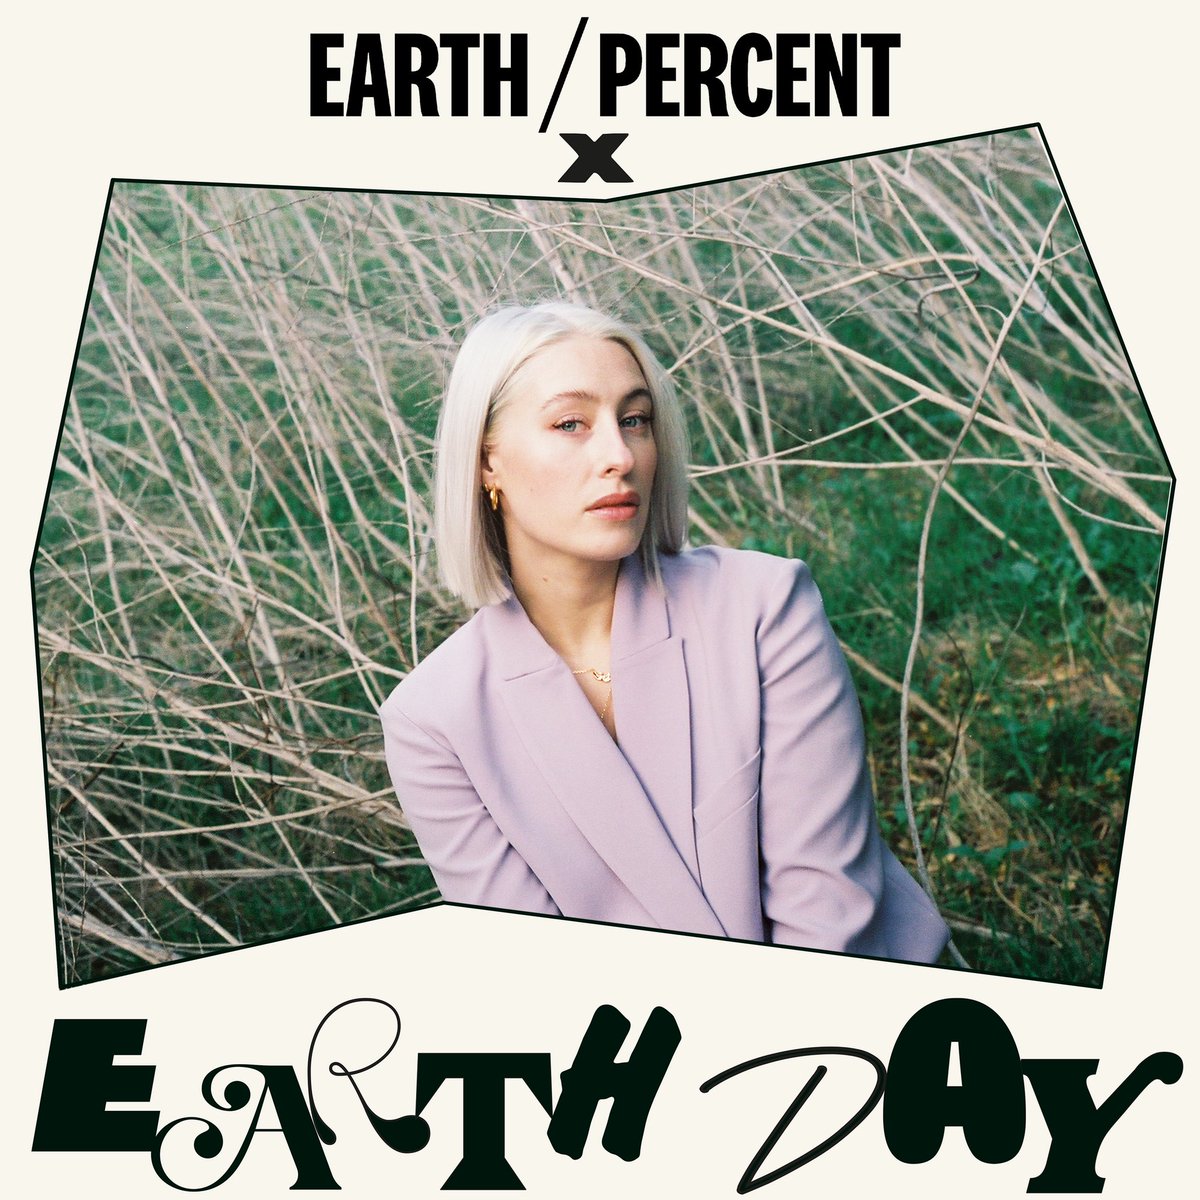 HAPPY EARTH DAY!
.@earthpercentorg x Earth Day launches today! Delighted to be one of the 100+ artists offering an exclusive down to support organisations doing vital work to help tackle the climate emergency 
#EarthPercentEarthDay #NOMUSICONADEADPLANET 

iamvioletskies.bandcamp.com/track/settle-l…